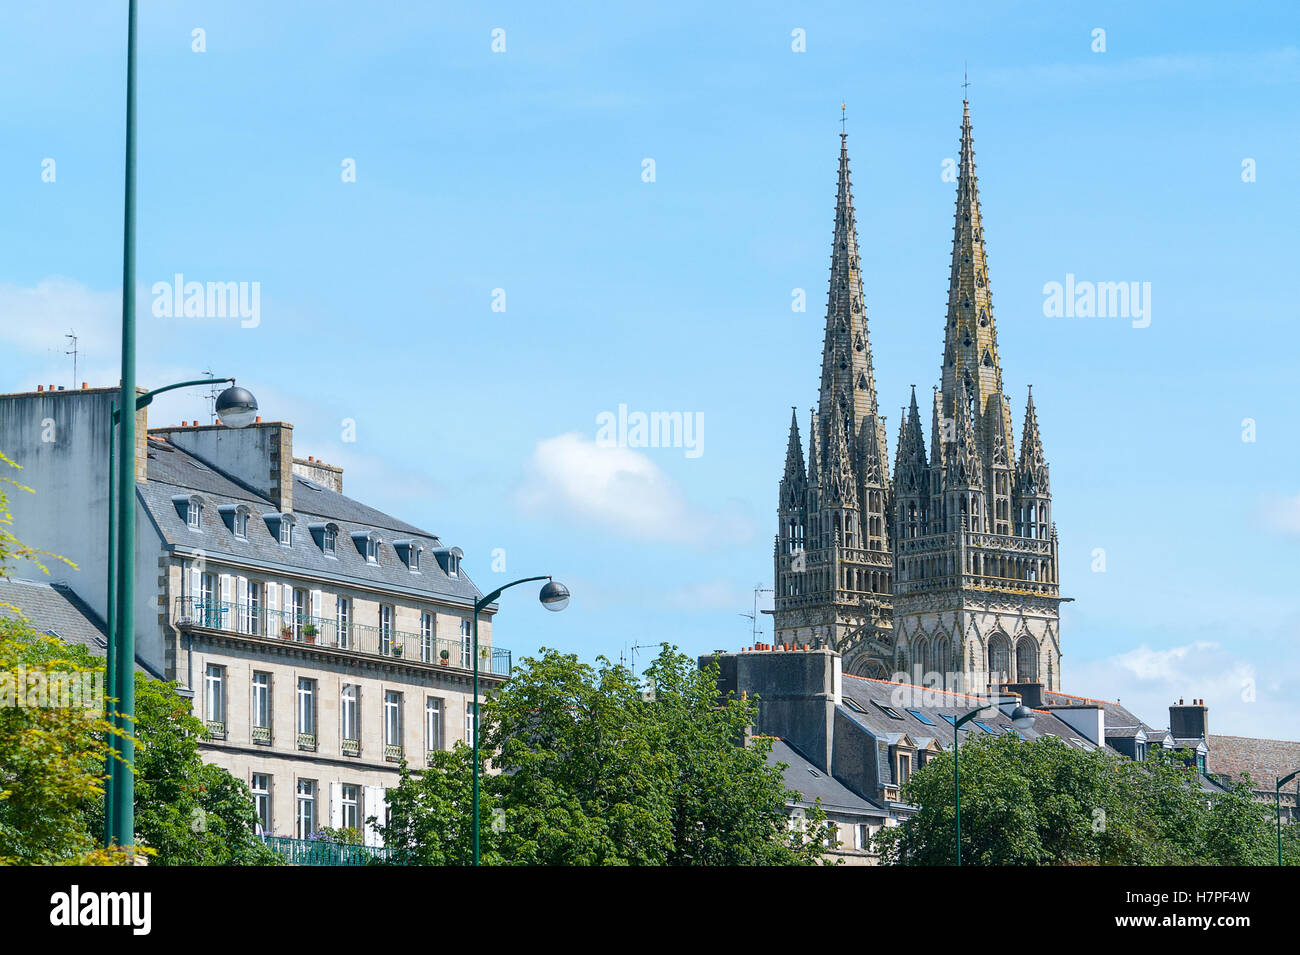 Scenery at Quimper, a commune and capital of the Finistere department of Brittany in northwestern France. Stock Photo